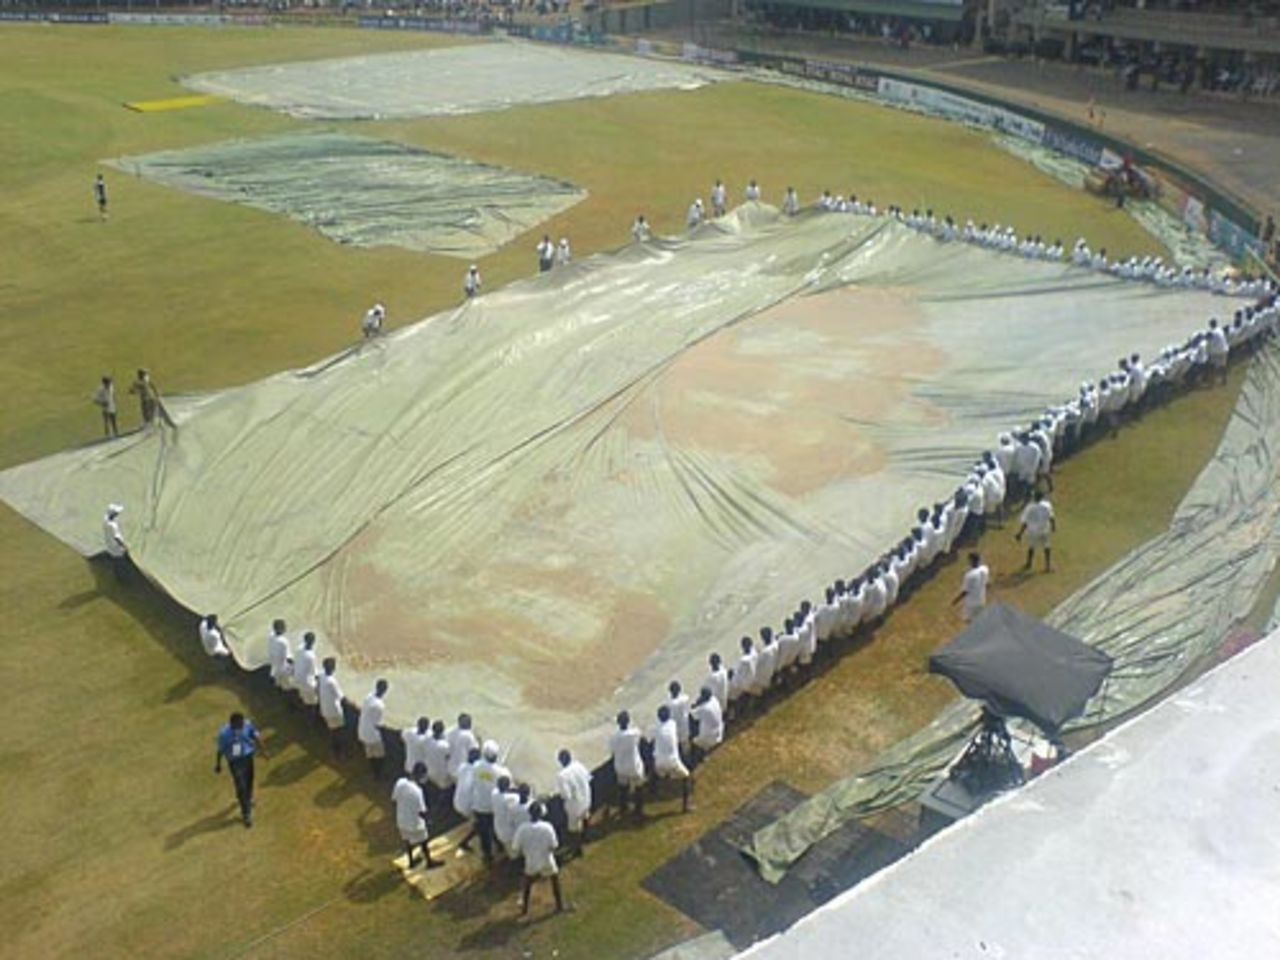 Covers come off after the rain interruption, Sri Lanka v India, 2nd Test, Galle, 1st day, July 31, 2008